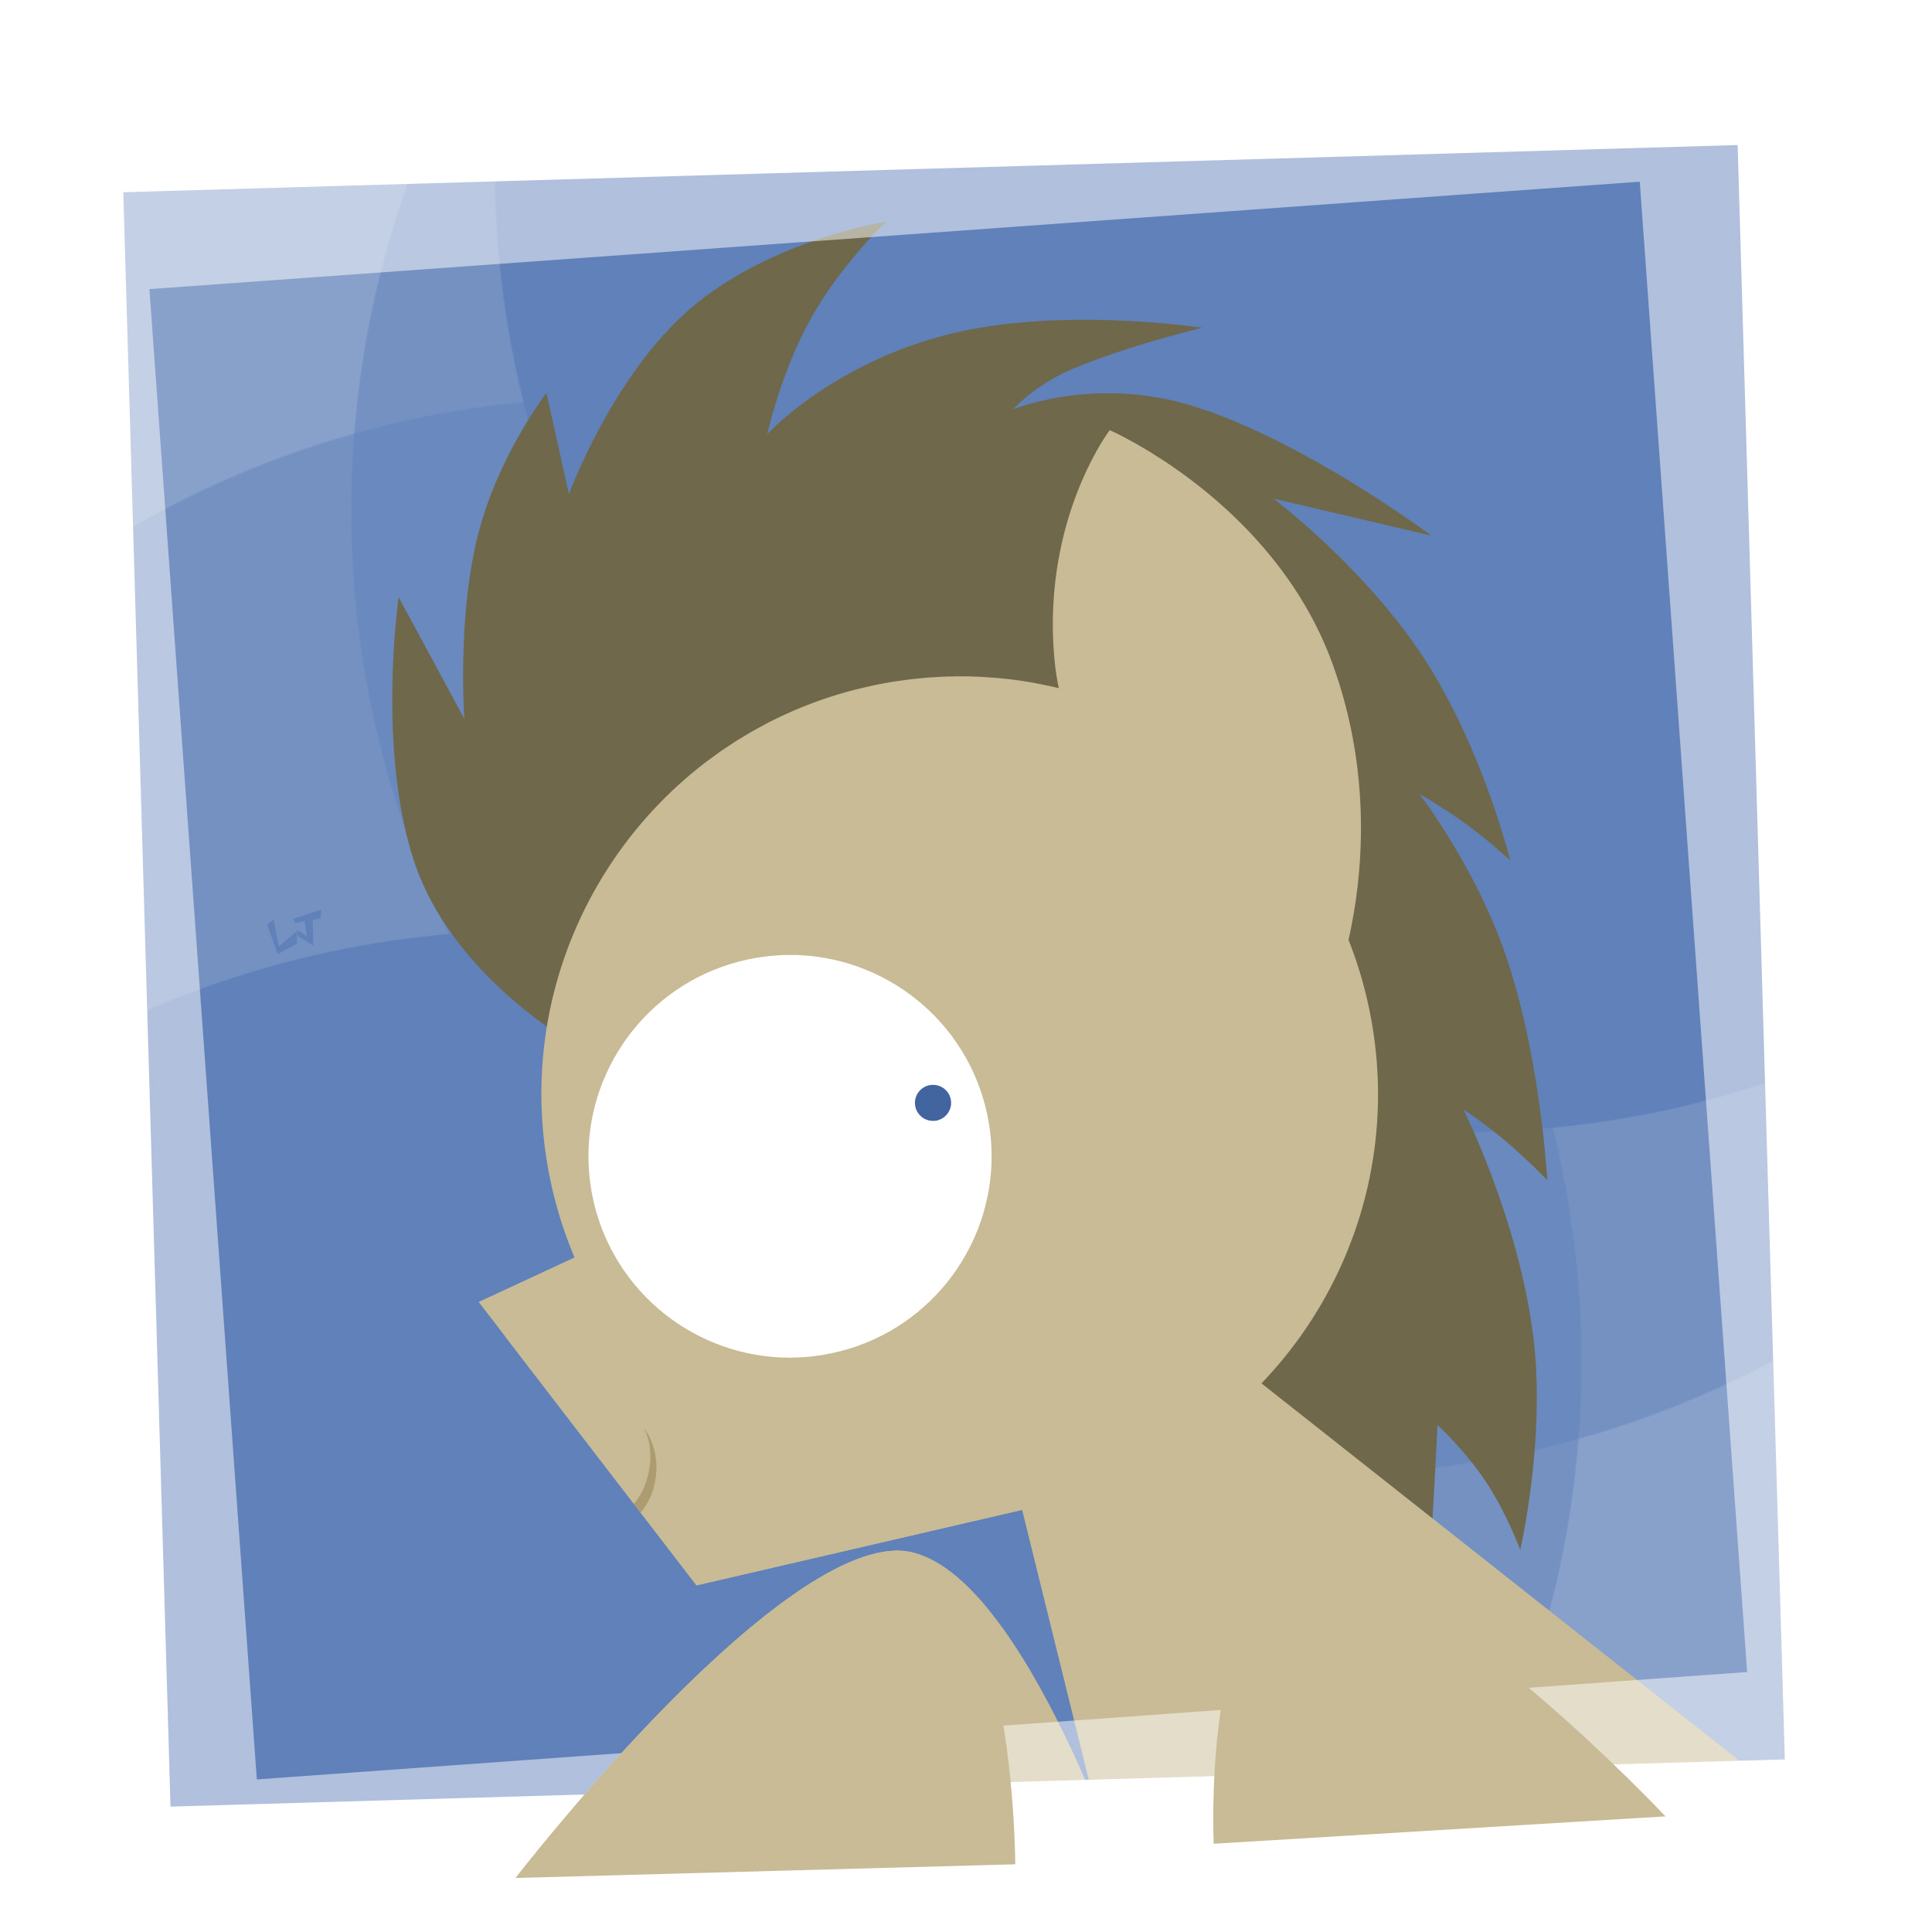 http://orig05.deviantart.net/cab5/f/2015/151/9/3/dr_whooves_by_limejerry-d8vfwnh.jpg